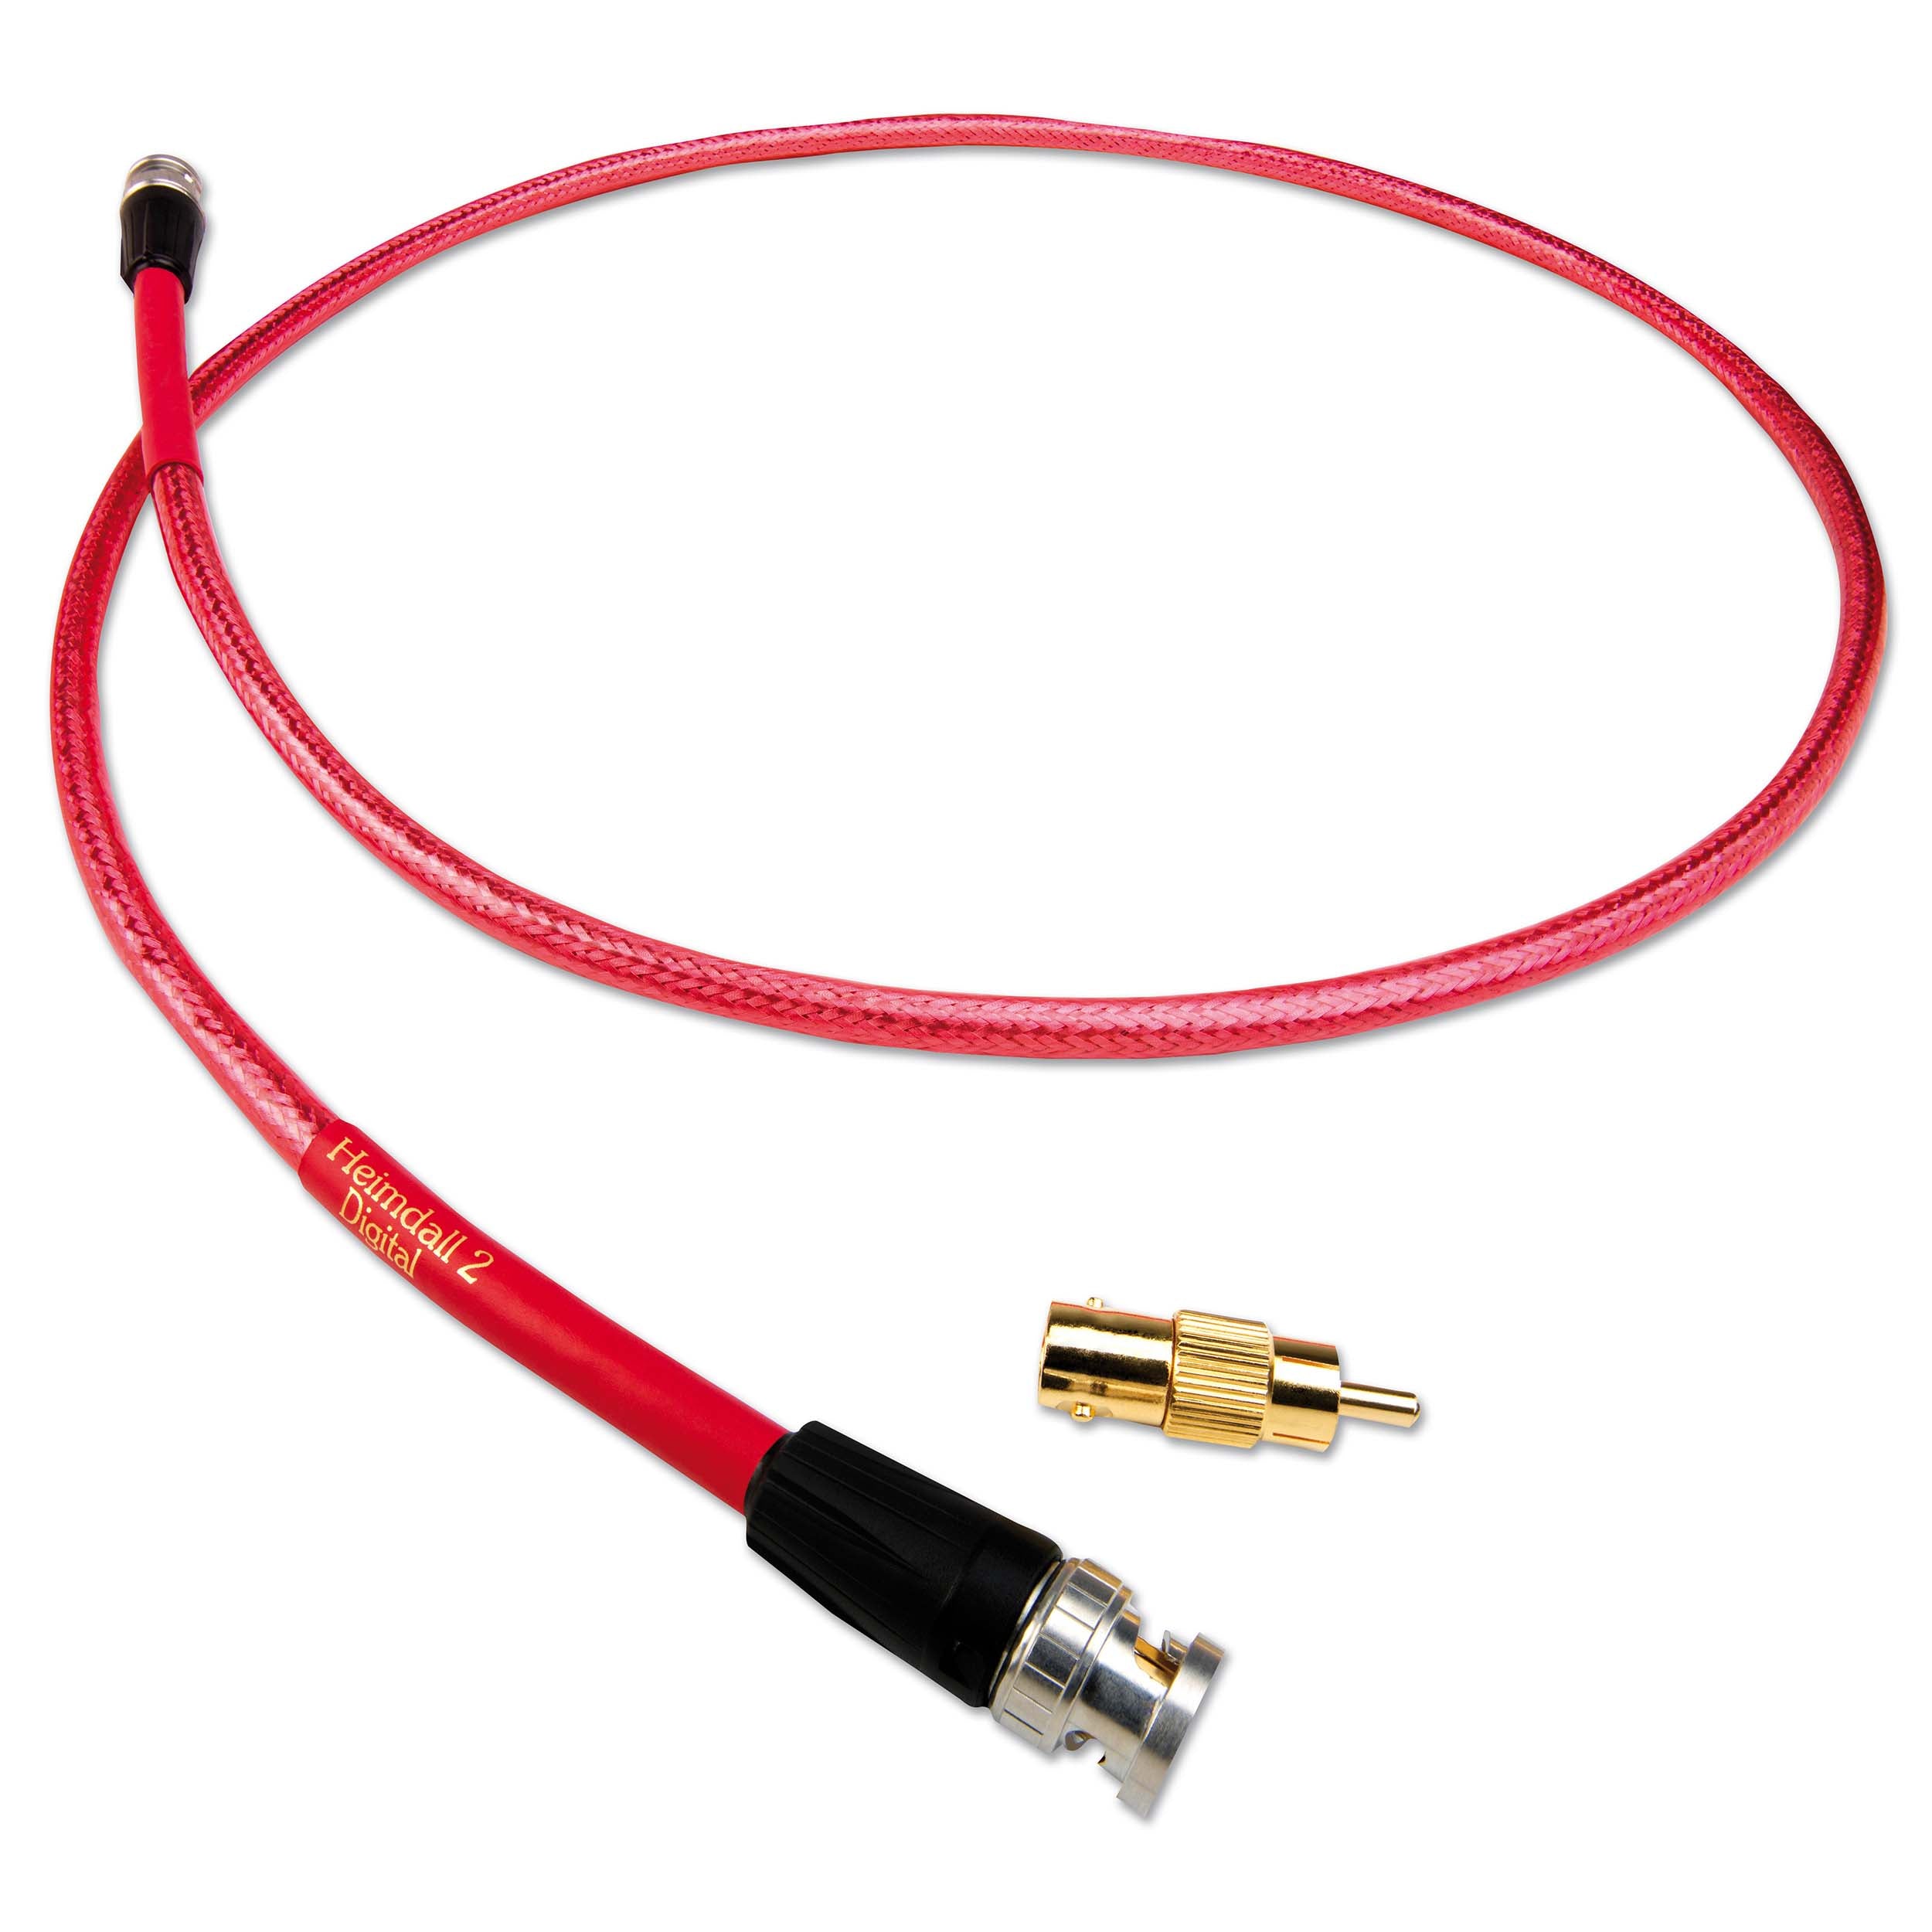 Nordost Heimdall 2 Digital - 75 OHM Cable